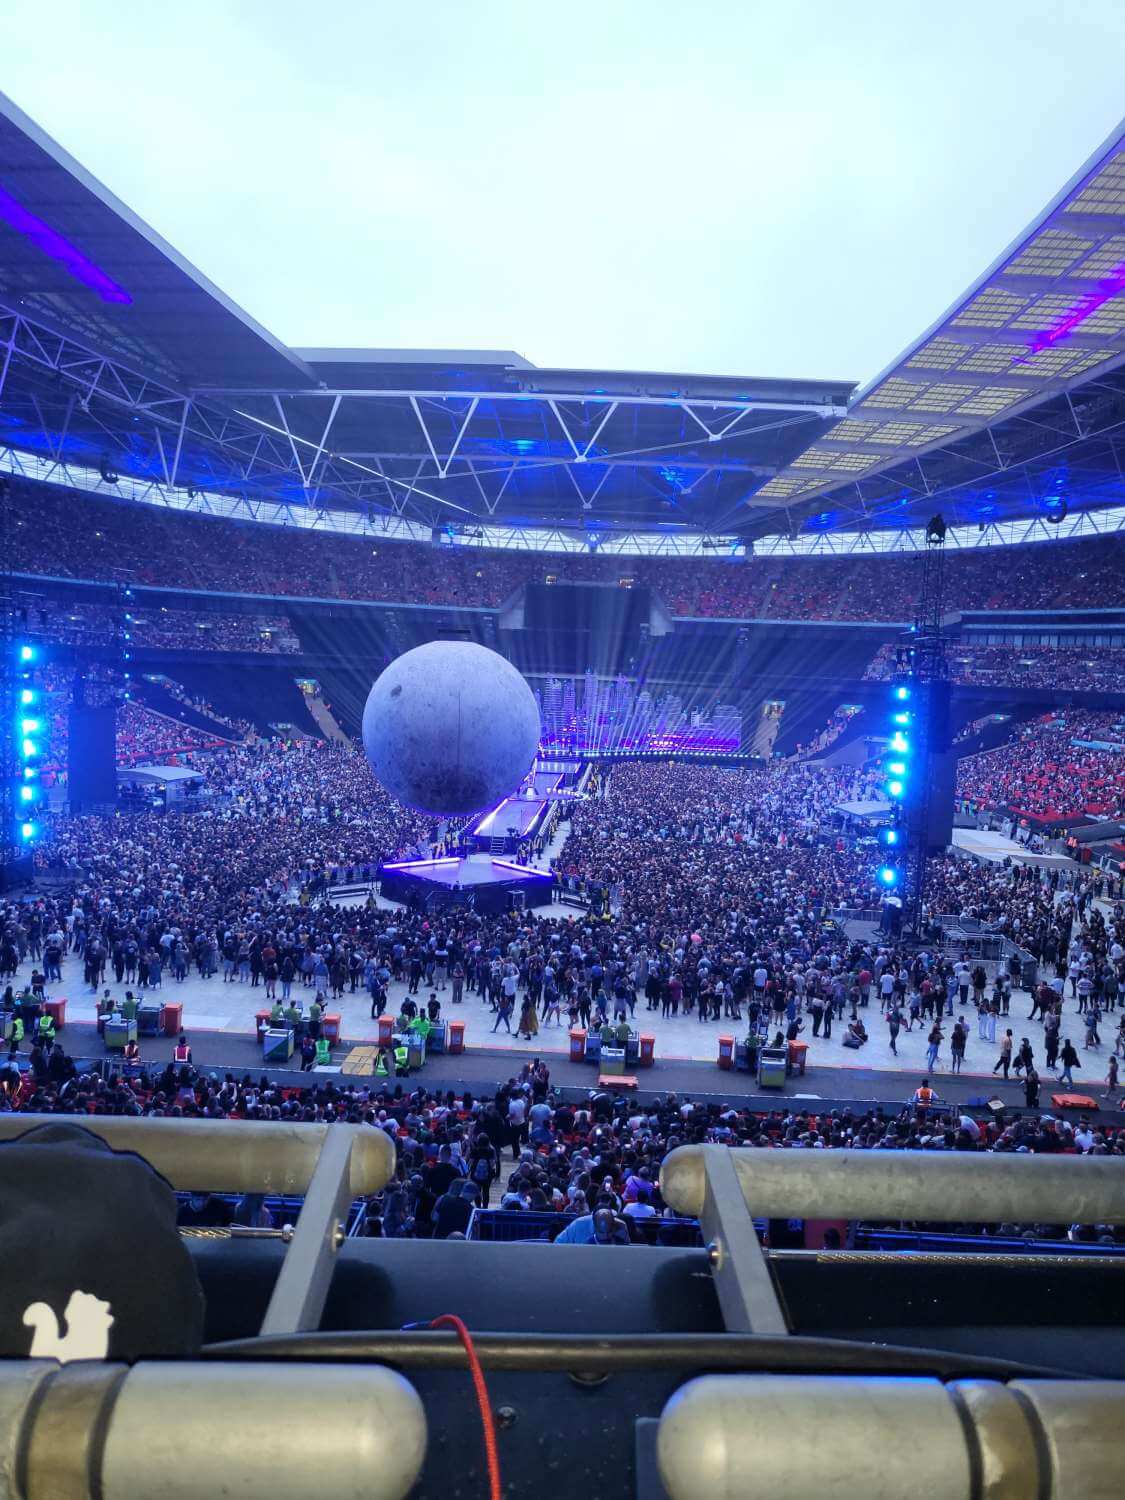 View of The weeknd at Wembley Stadium from Seat Block 213, Row 1, Seat 279